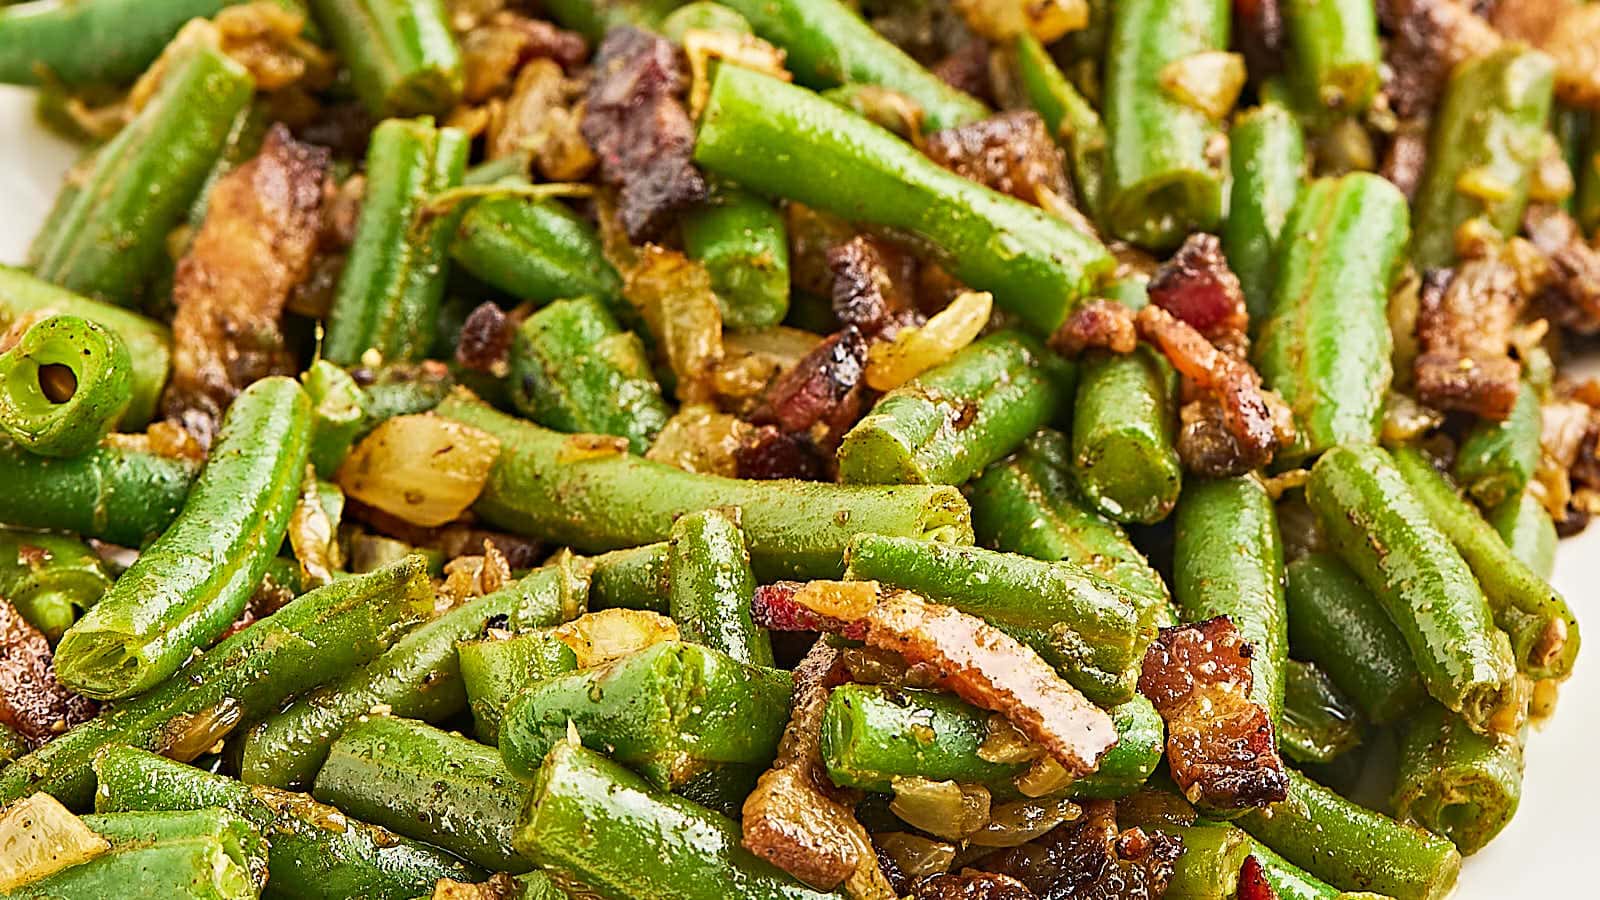 Green Beans And Bacon recipe by Cheerful Cook.